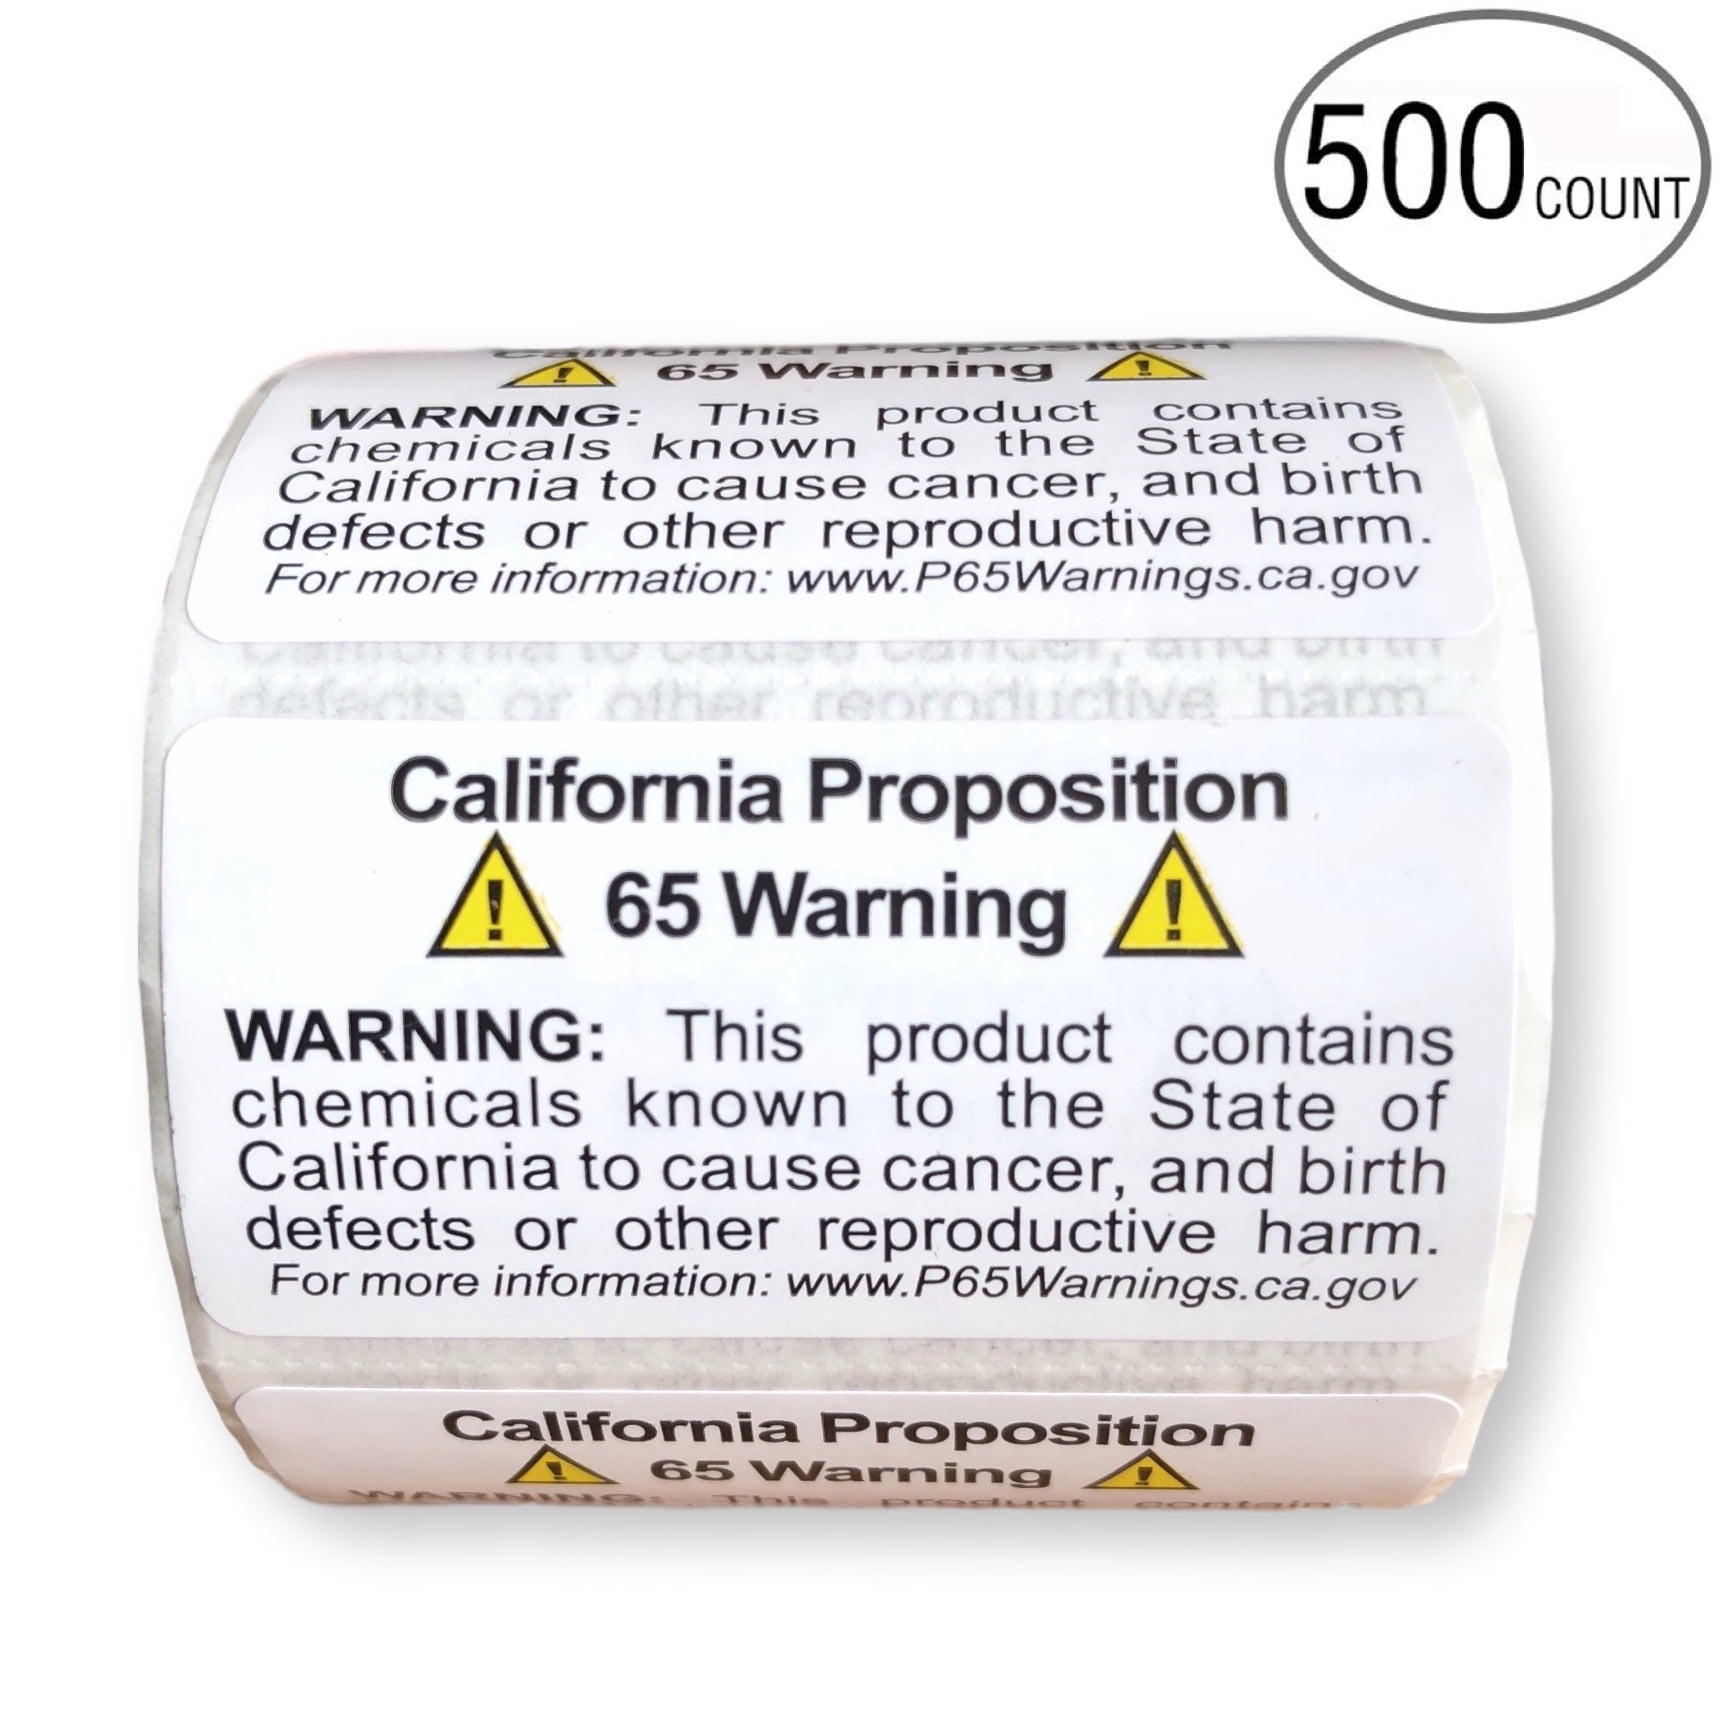 0.5 x 1.5 California Proposition 65 Short-Form Sticker Pack Adhesive Warning Labels Pack of 500